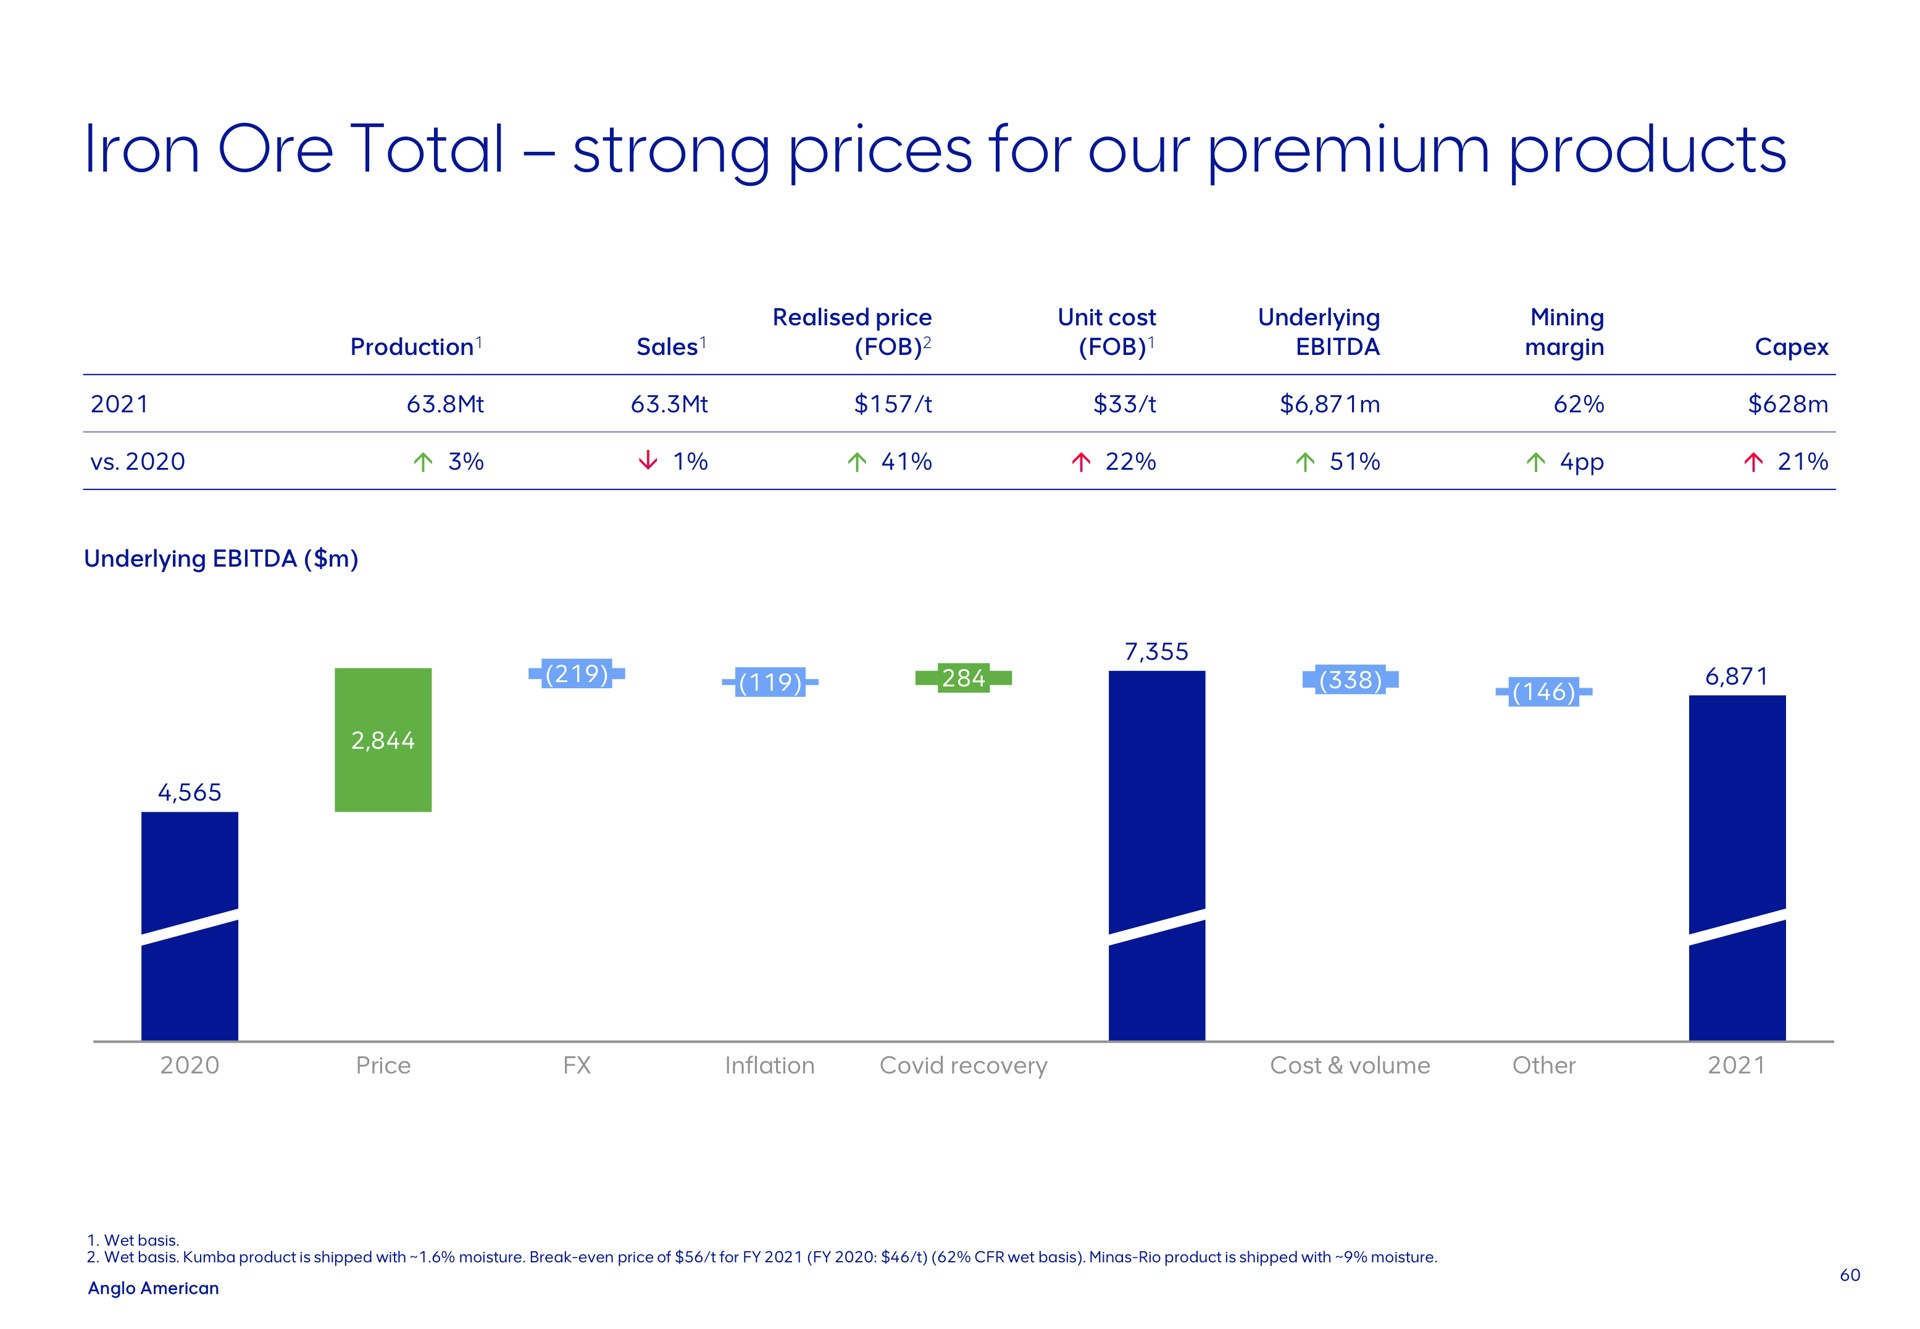 iron ore total strong prices for our premium products | AngloAmerican